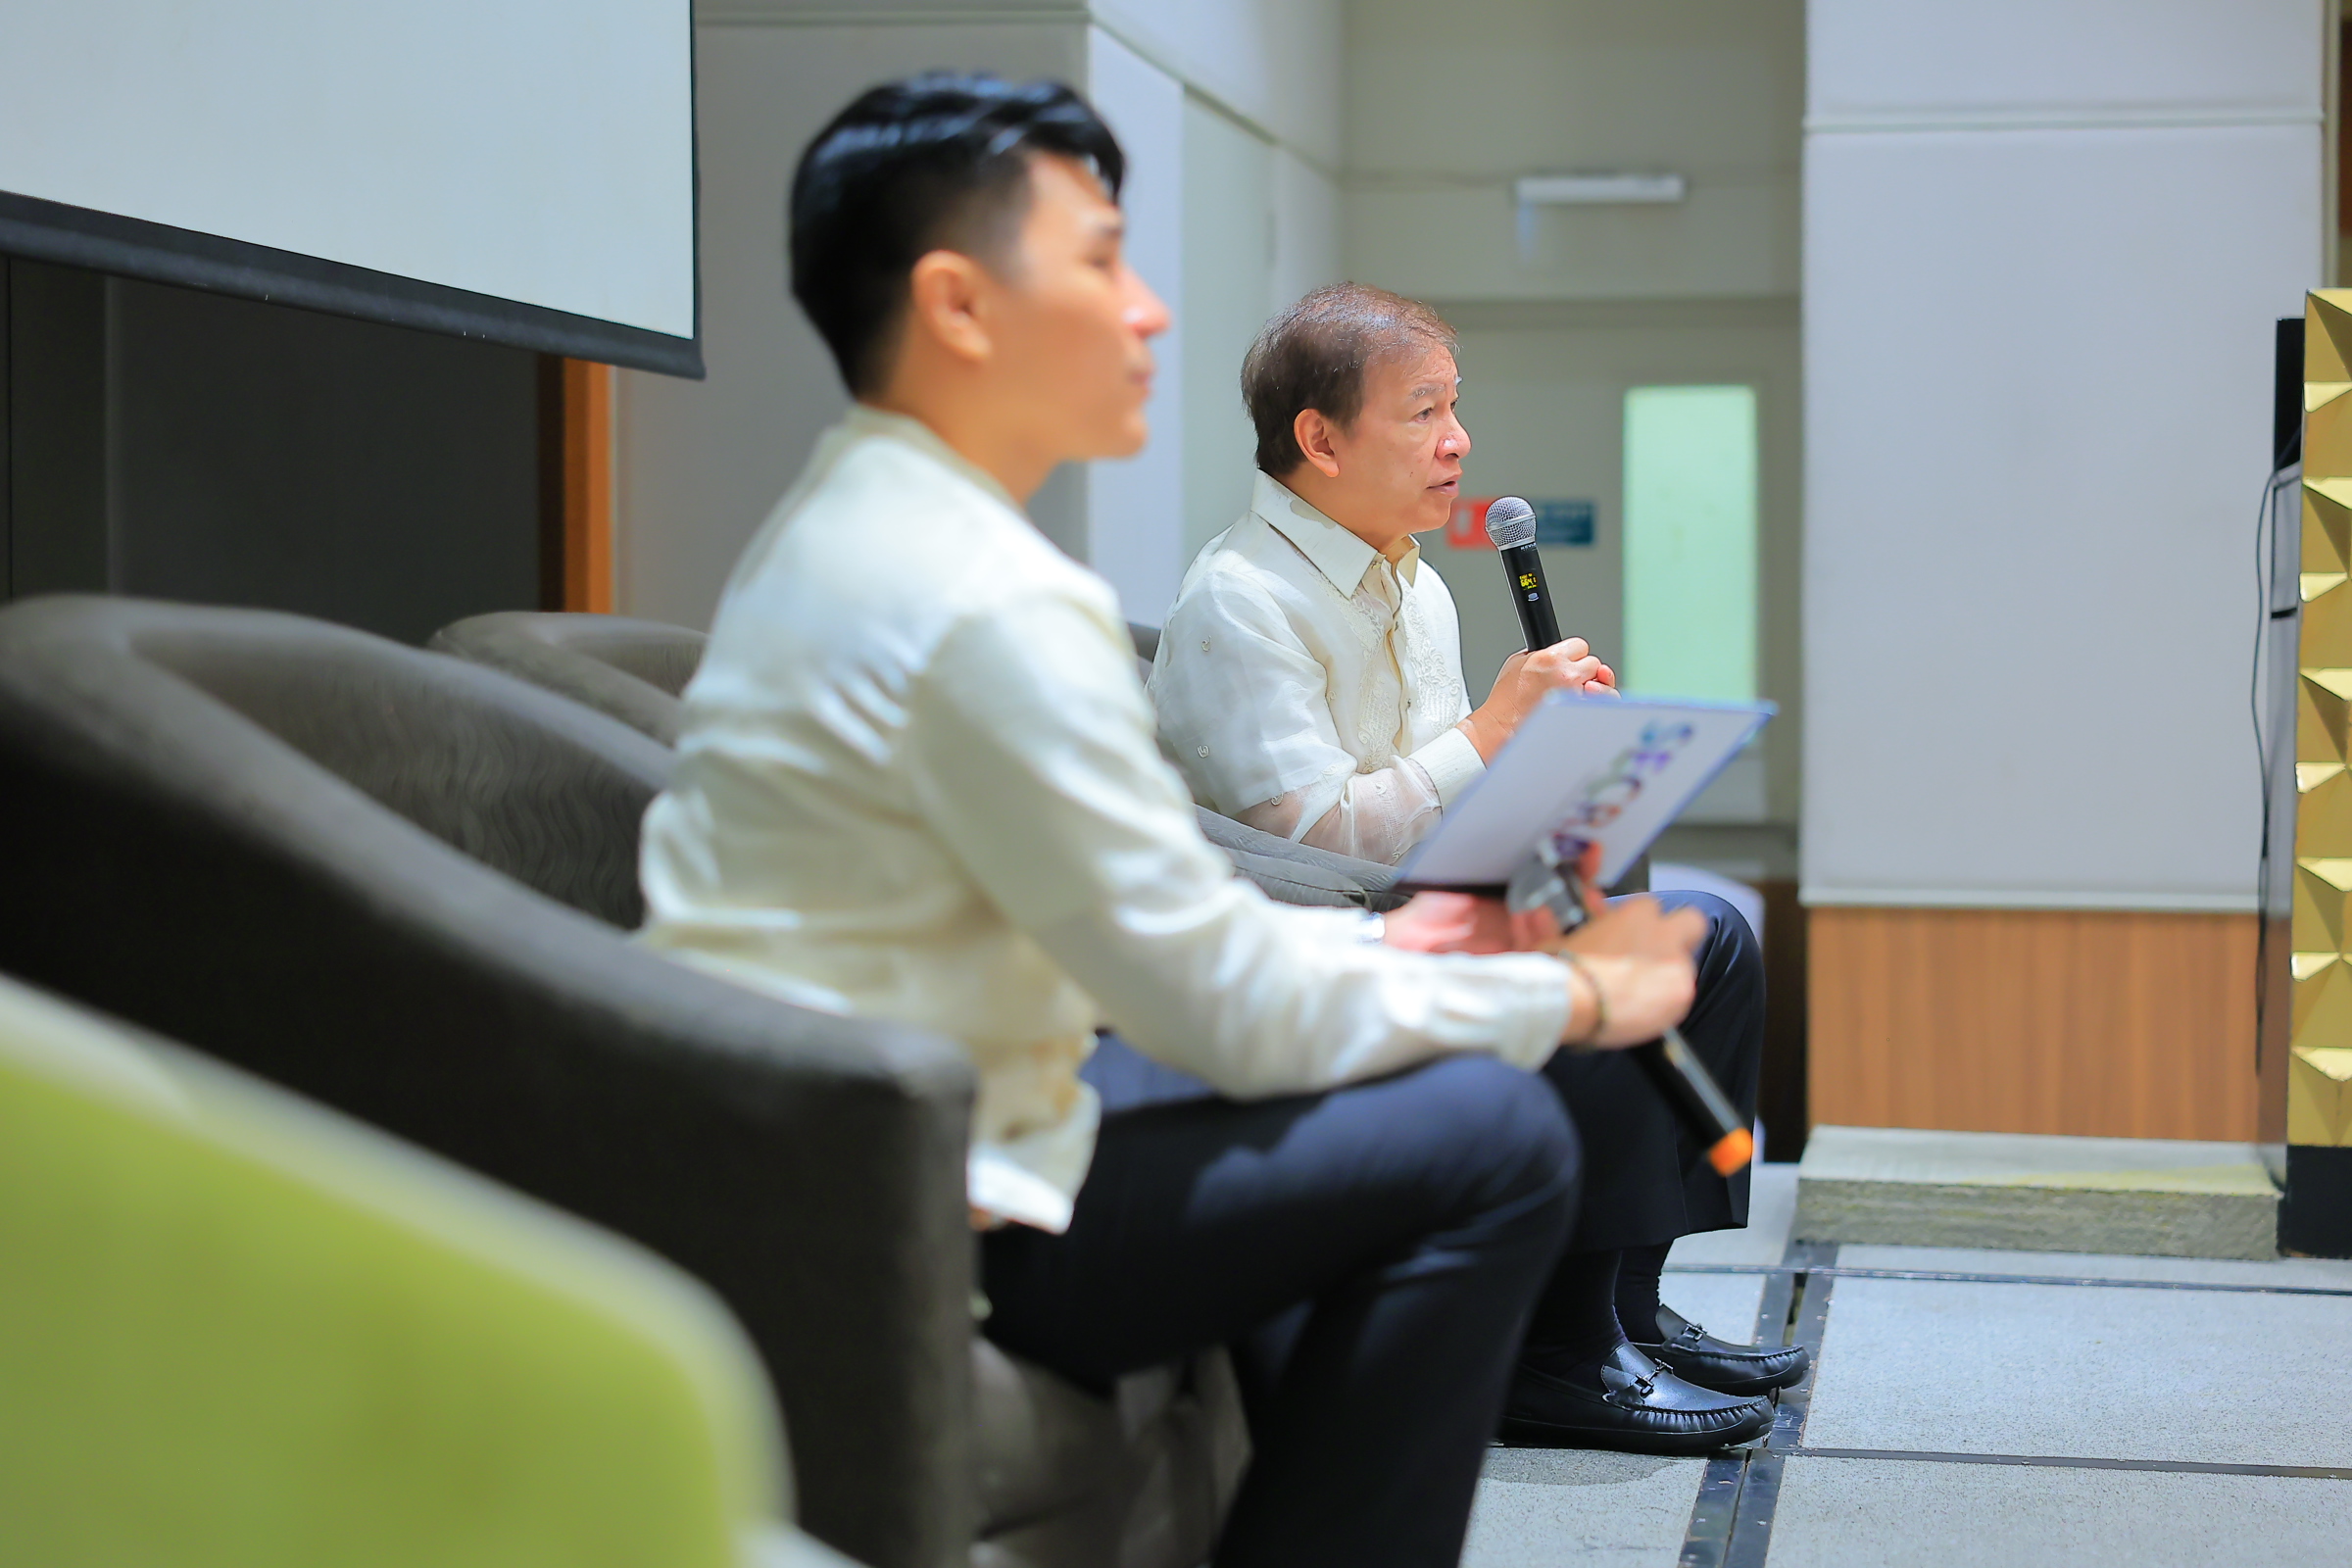 Mr Meily (right) and Mr Chavez (left) during the open forum.